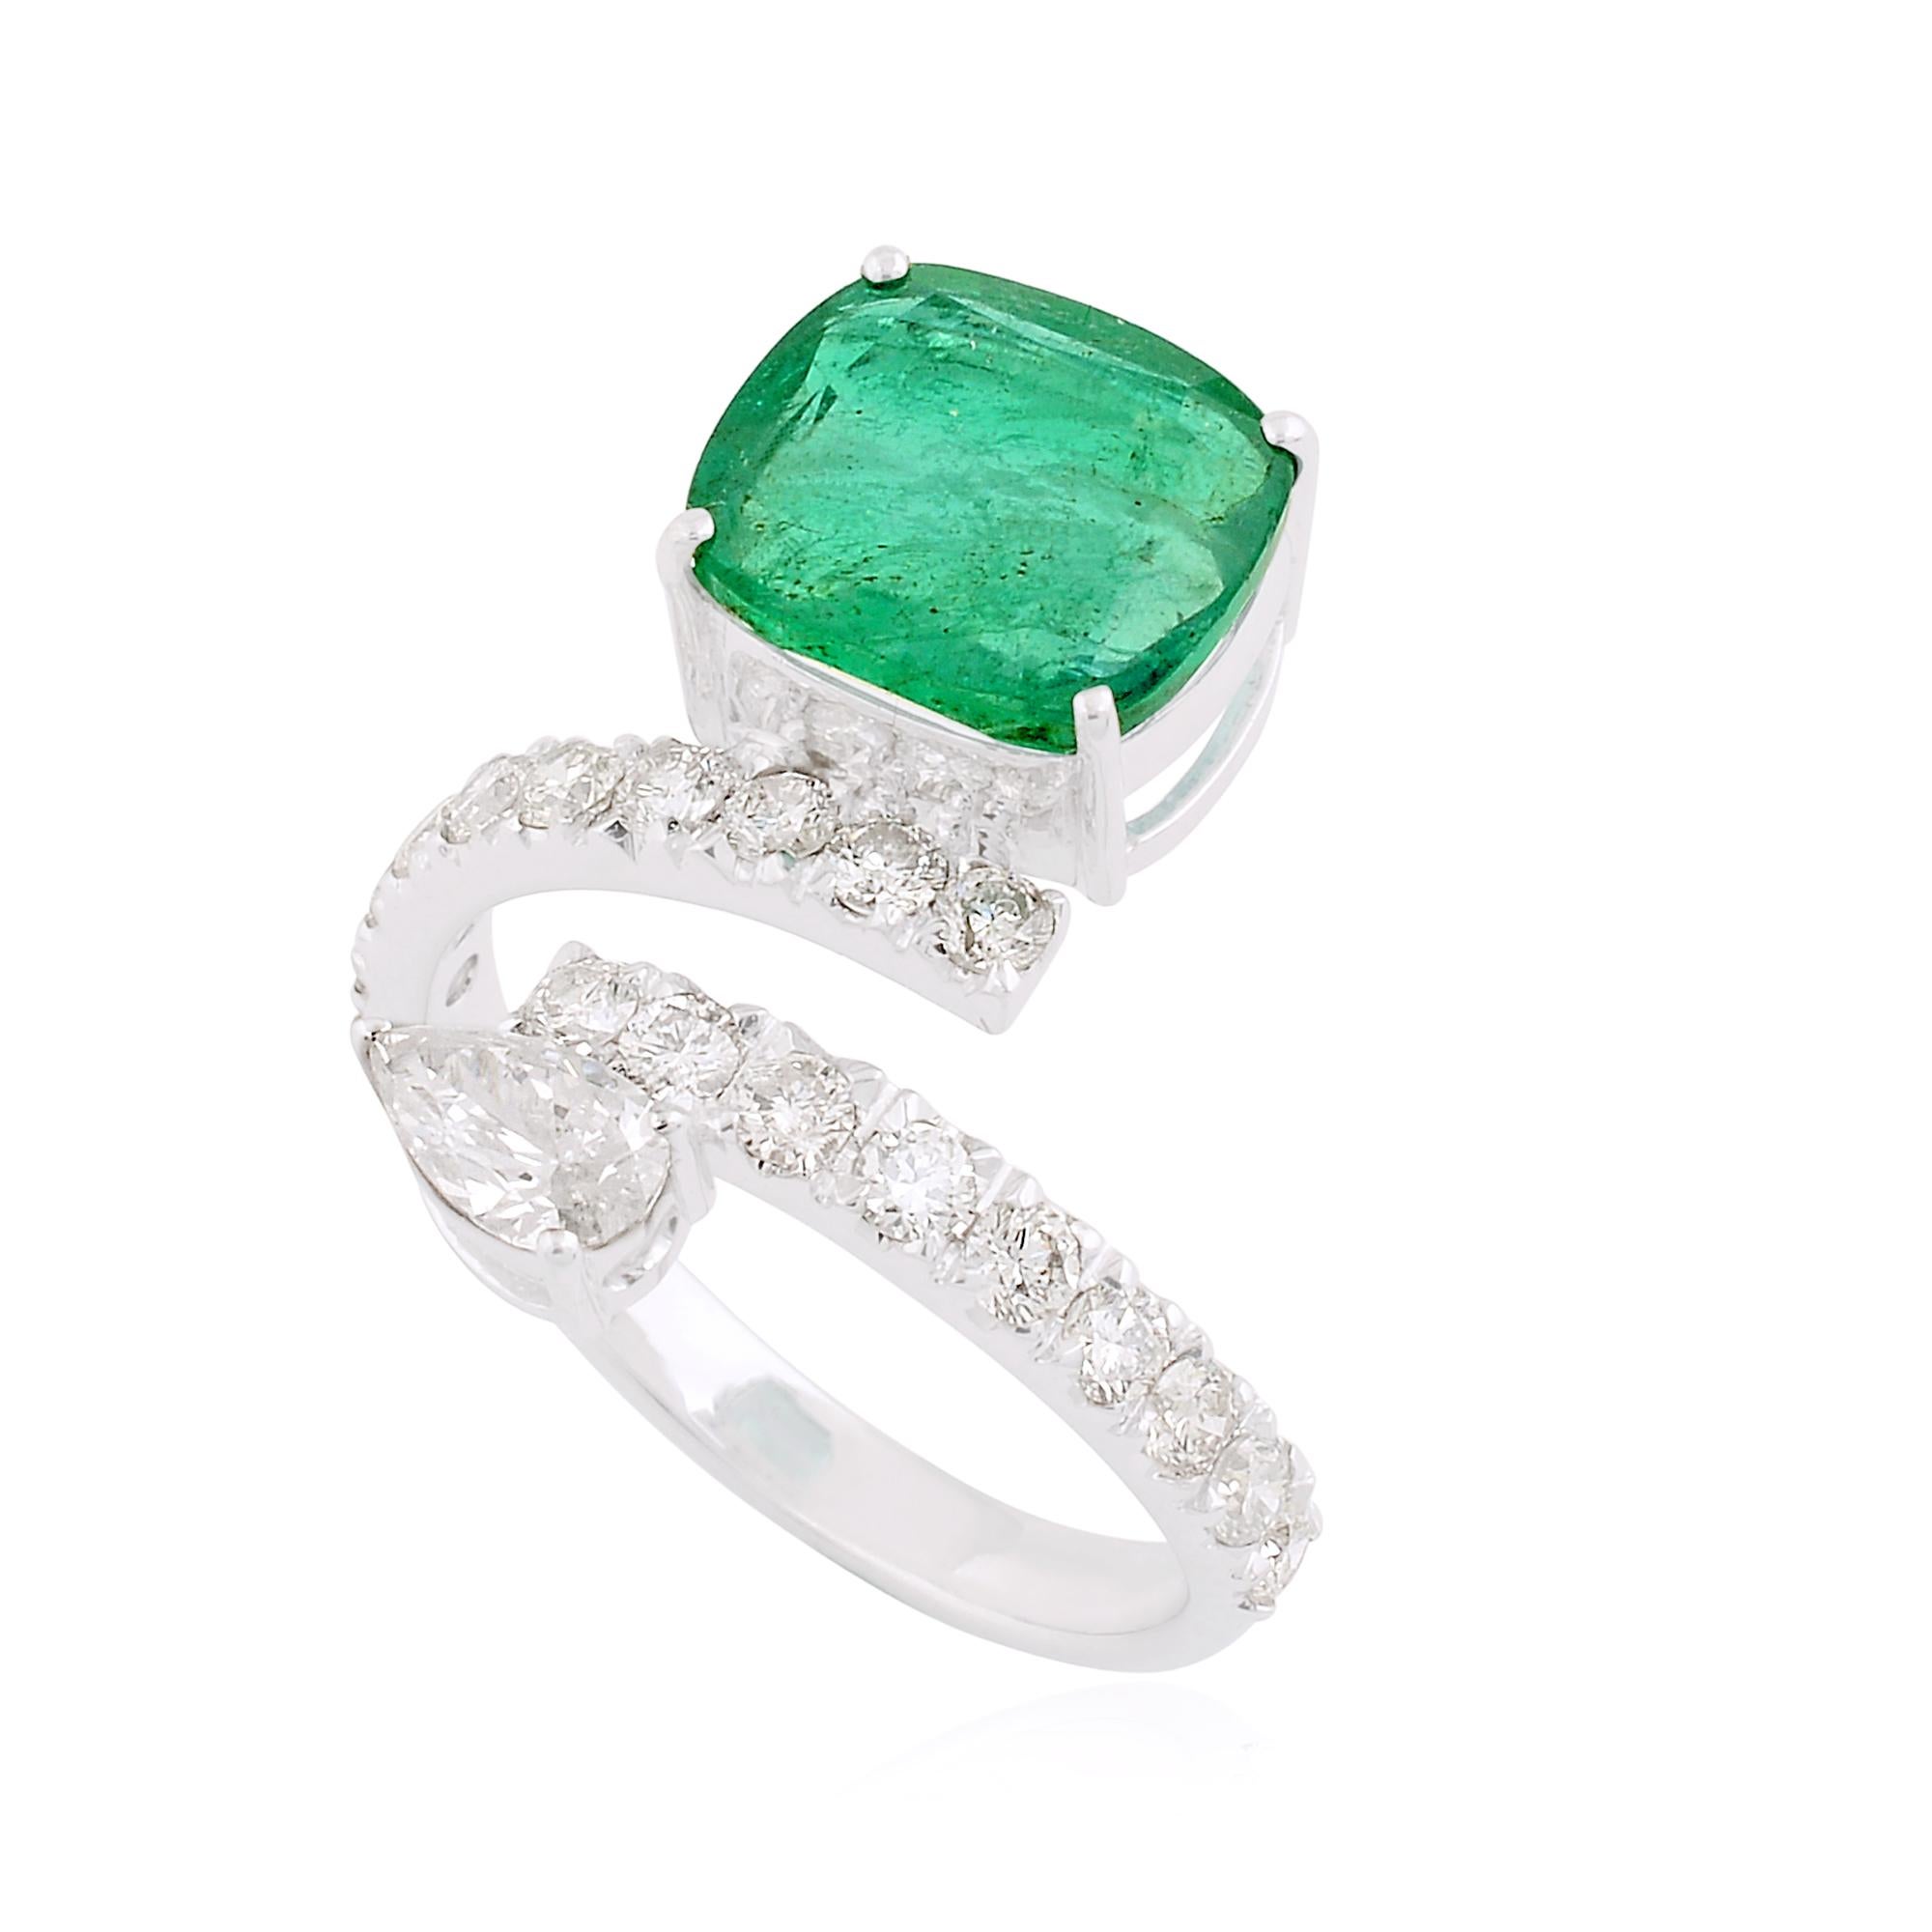 Crafted with precision and attention to detail, the ring is fashioned in solid 14 Karat White Gold, adding a timeless elegance to the design. The white gold setting provides the perfect backdrop for the emerald and diamonds, creating a harmonious